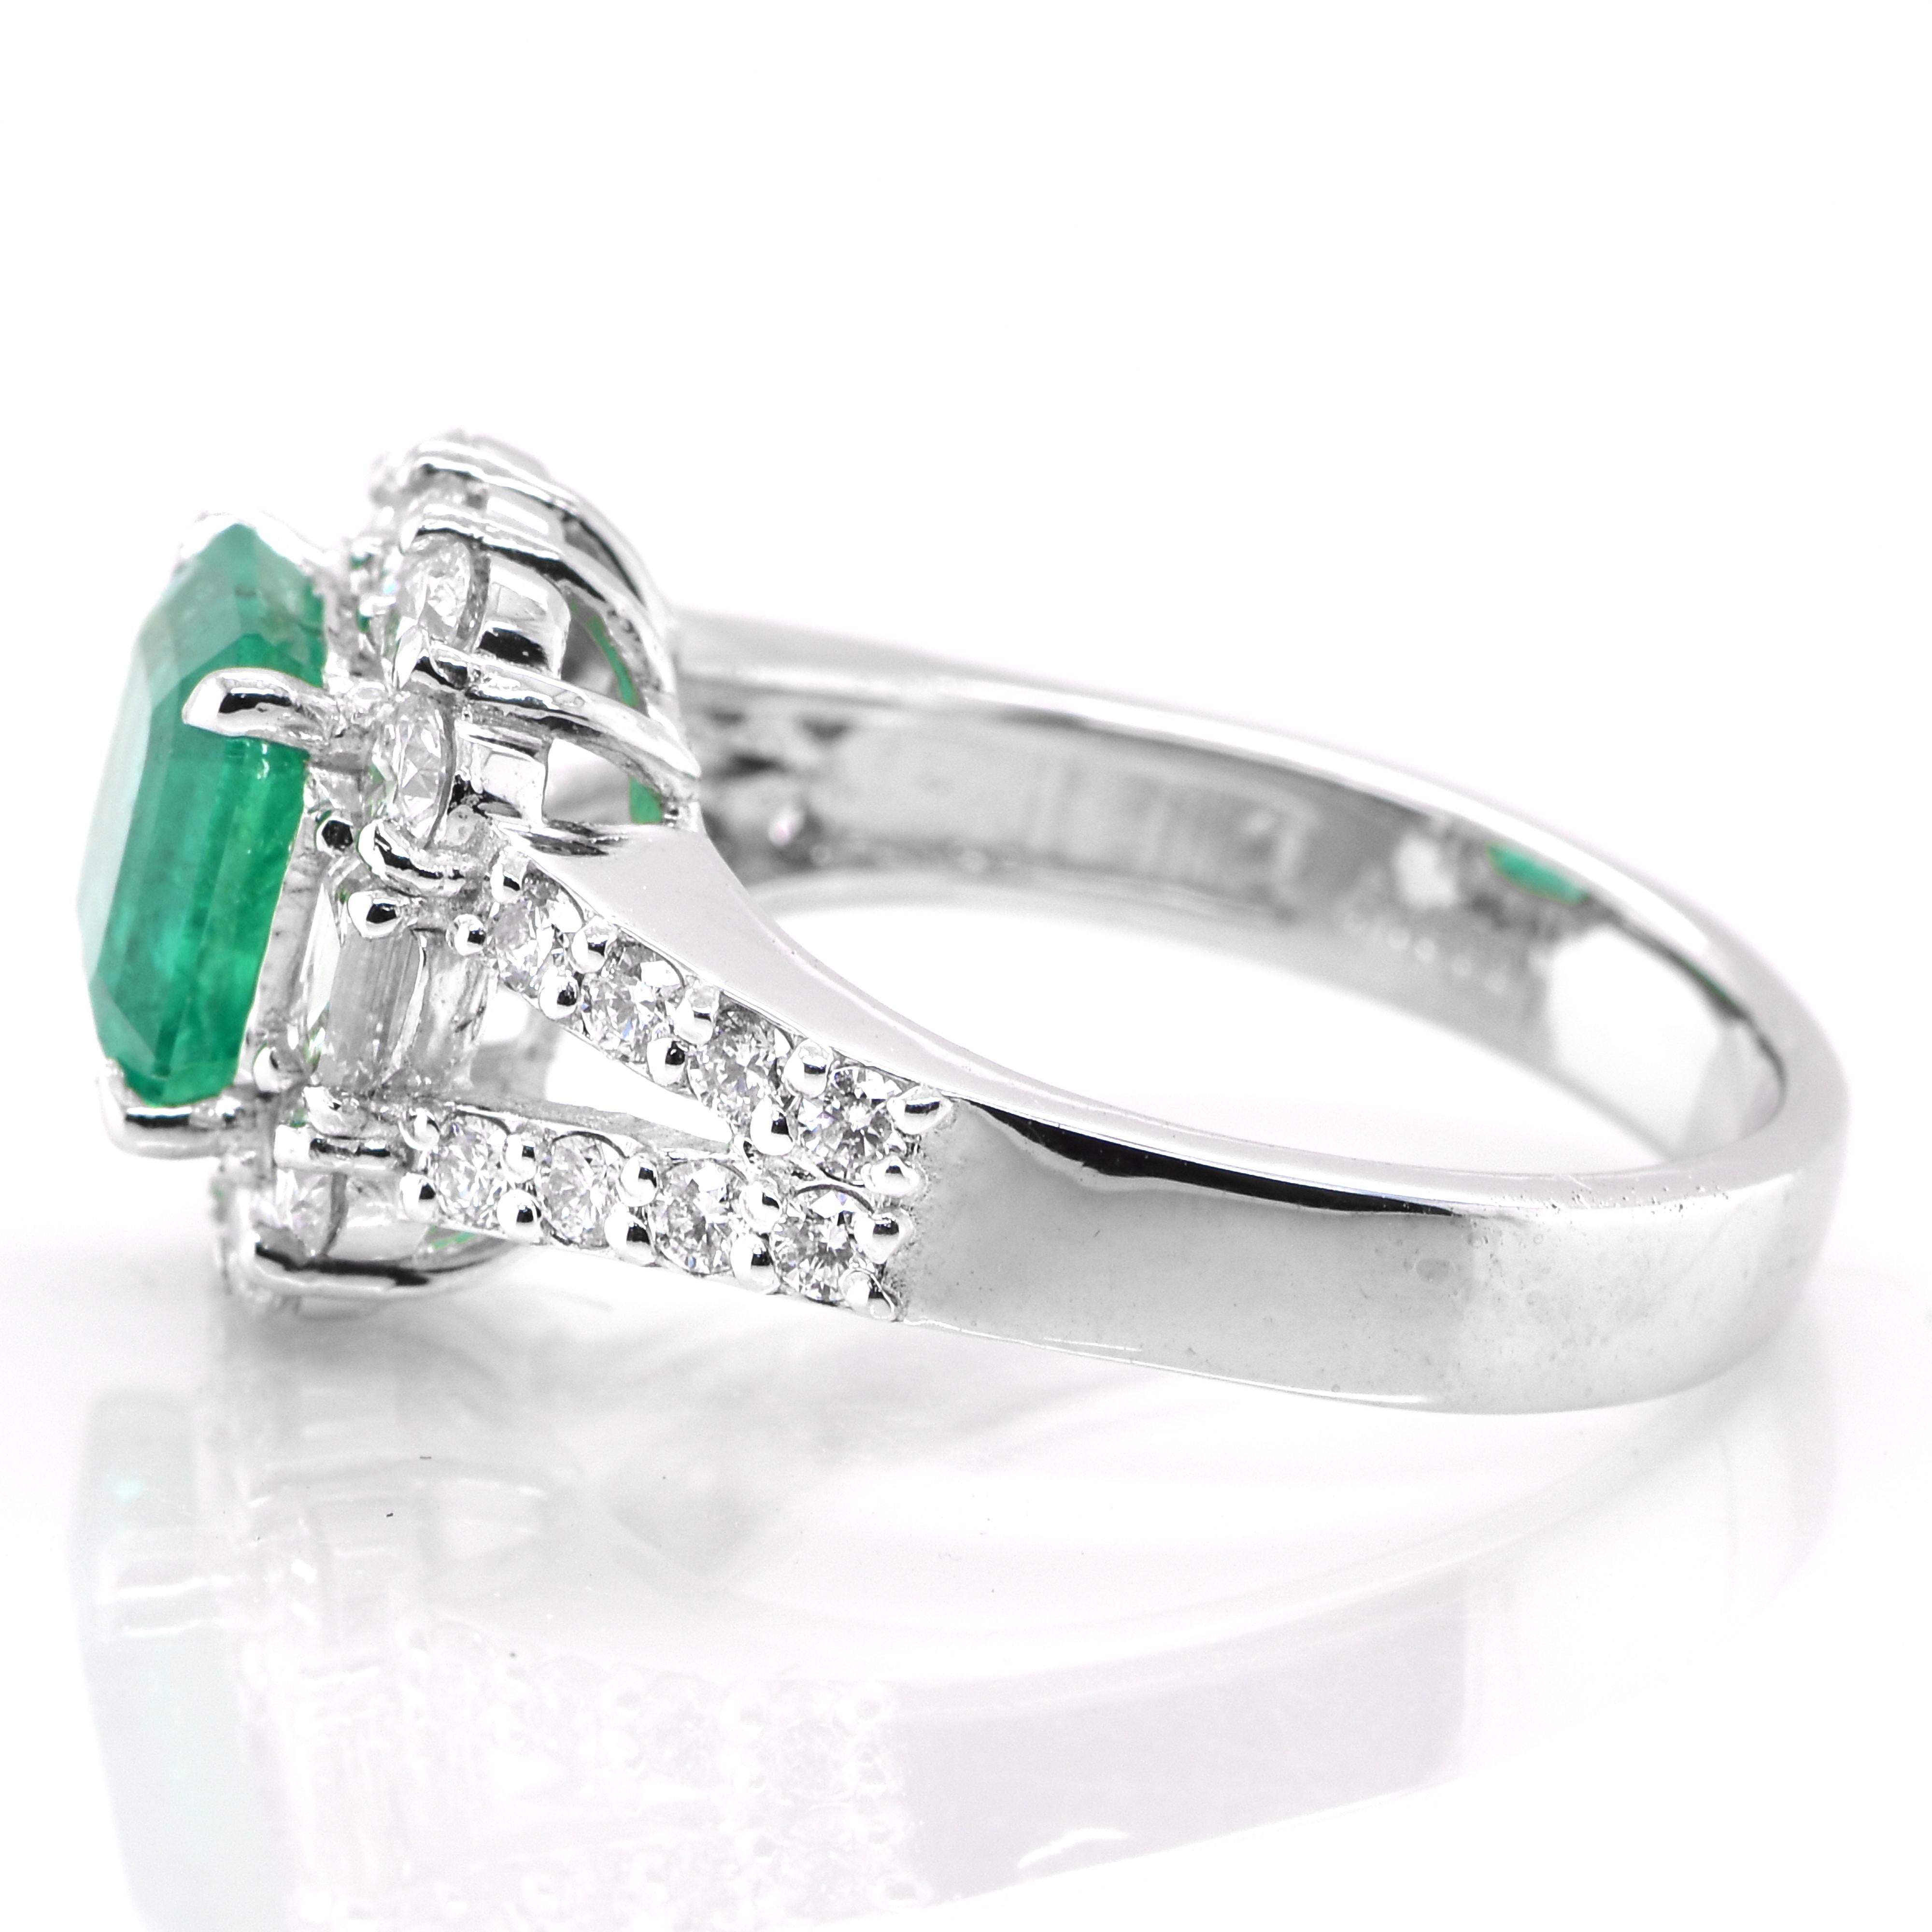 Emerald Cut 1.97 Carat Natural Colombian Emerald and Diamond Ring Made in Platinum For Sale